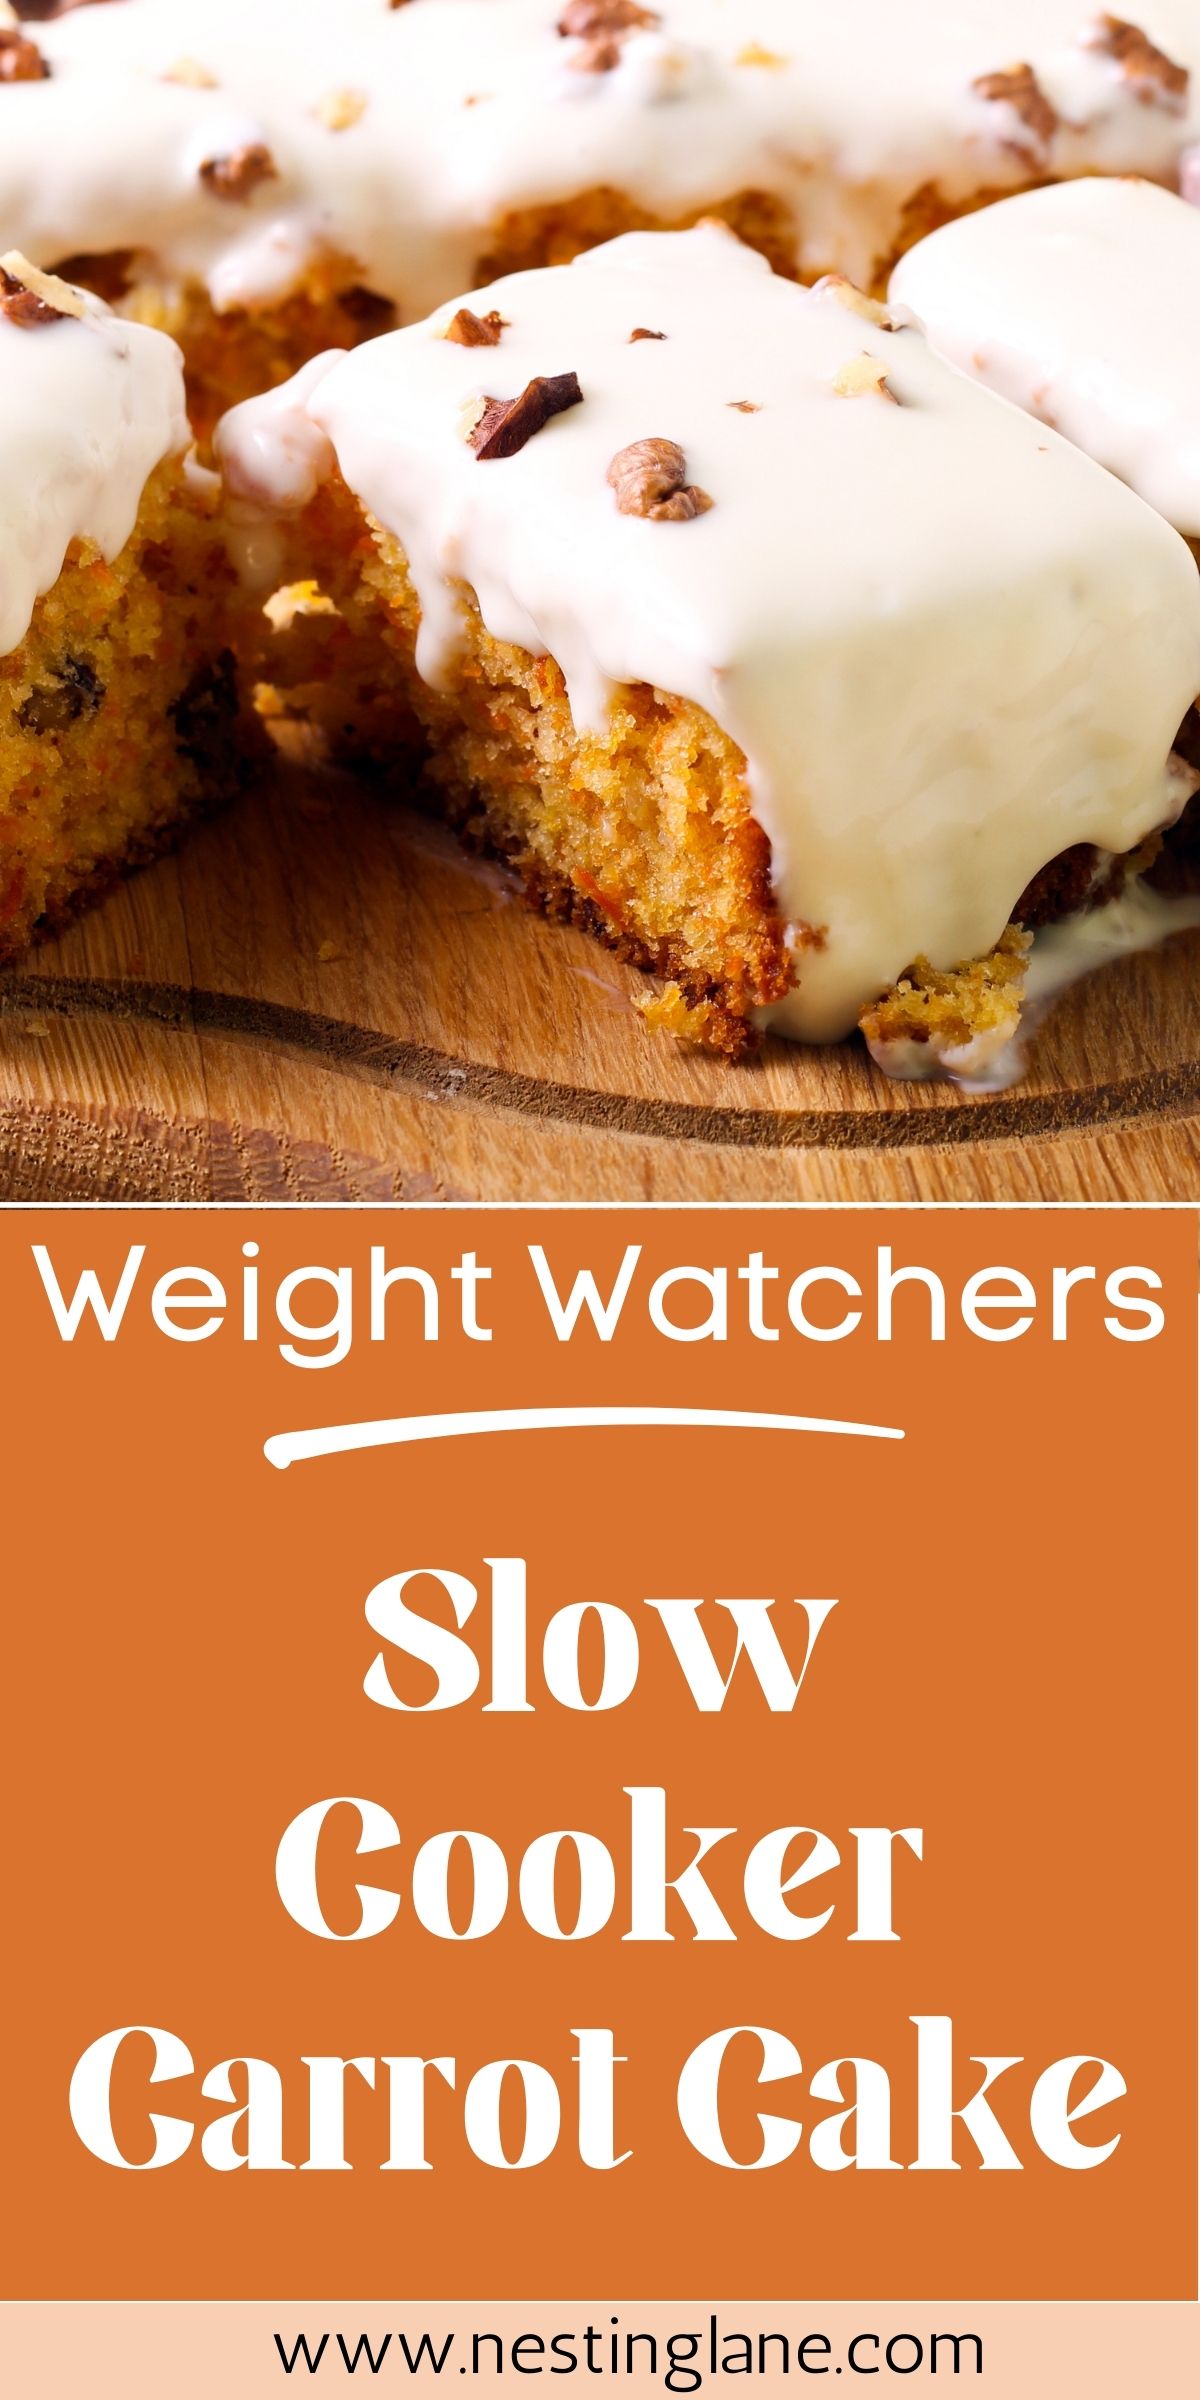 Graphic for Pinterest of Slow Cooker Weight Watchers Carrot Cake Recipe.